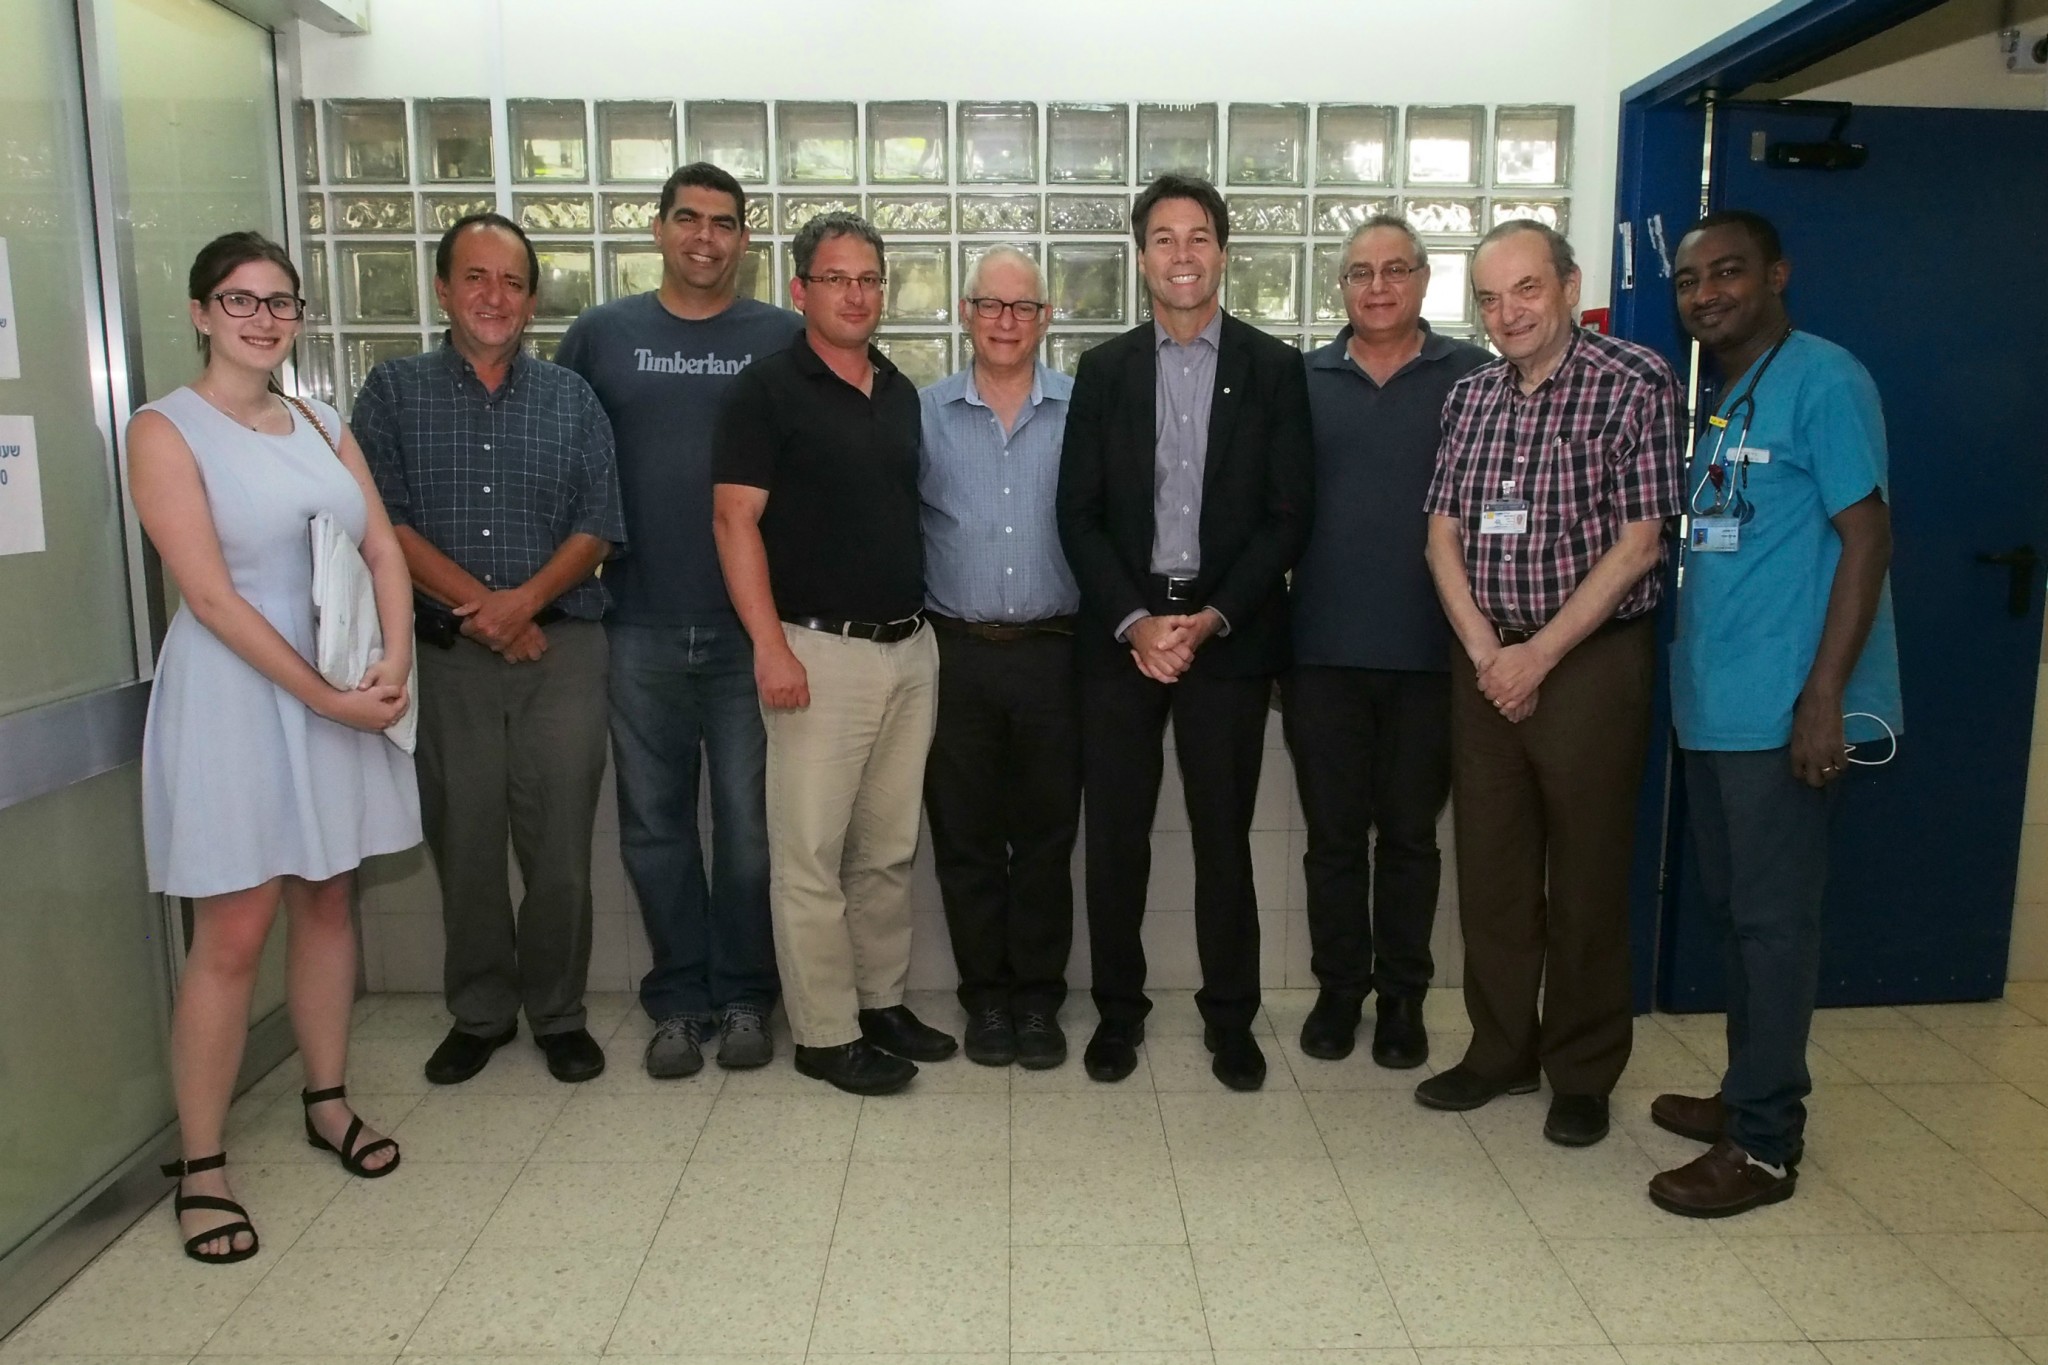 From left, Jessi Birenbaum from SACH Canada, Wolfson PICU director Dr. Sion Houri, adult and pediatric cardiac surgeon Dr. Hagi Dekel, SACH Executive Director Simon Fisher, Wolfson chief of pediatric cardiology Dr. Akiva Tamir, Ontario Health Minister Dr. Eric Hoskins, SACH lead surgeon and chief of cardiothoracic surgery Dr. Lior Sasson, Wolfson Director Dr. Yitzhak Berlovich, and Ethiopian surgeon in training Dr. Yayu Mekonnen. Photo by Sheila Shalhevet